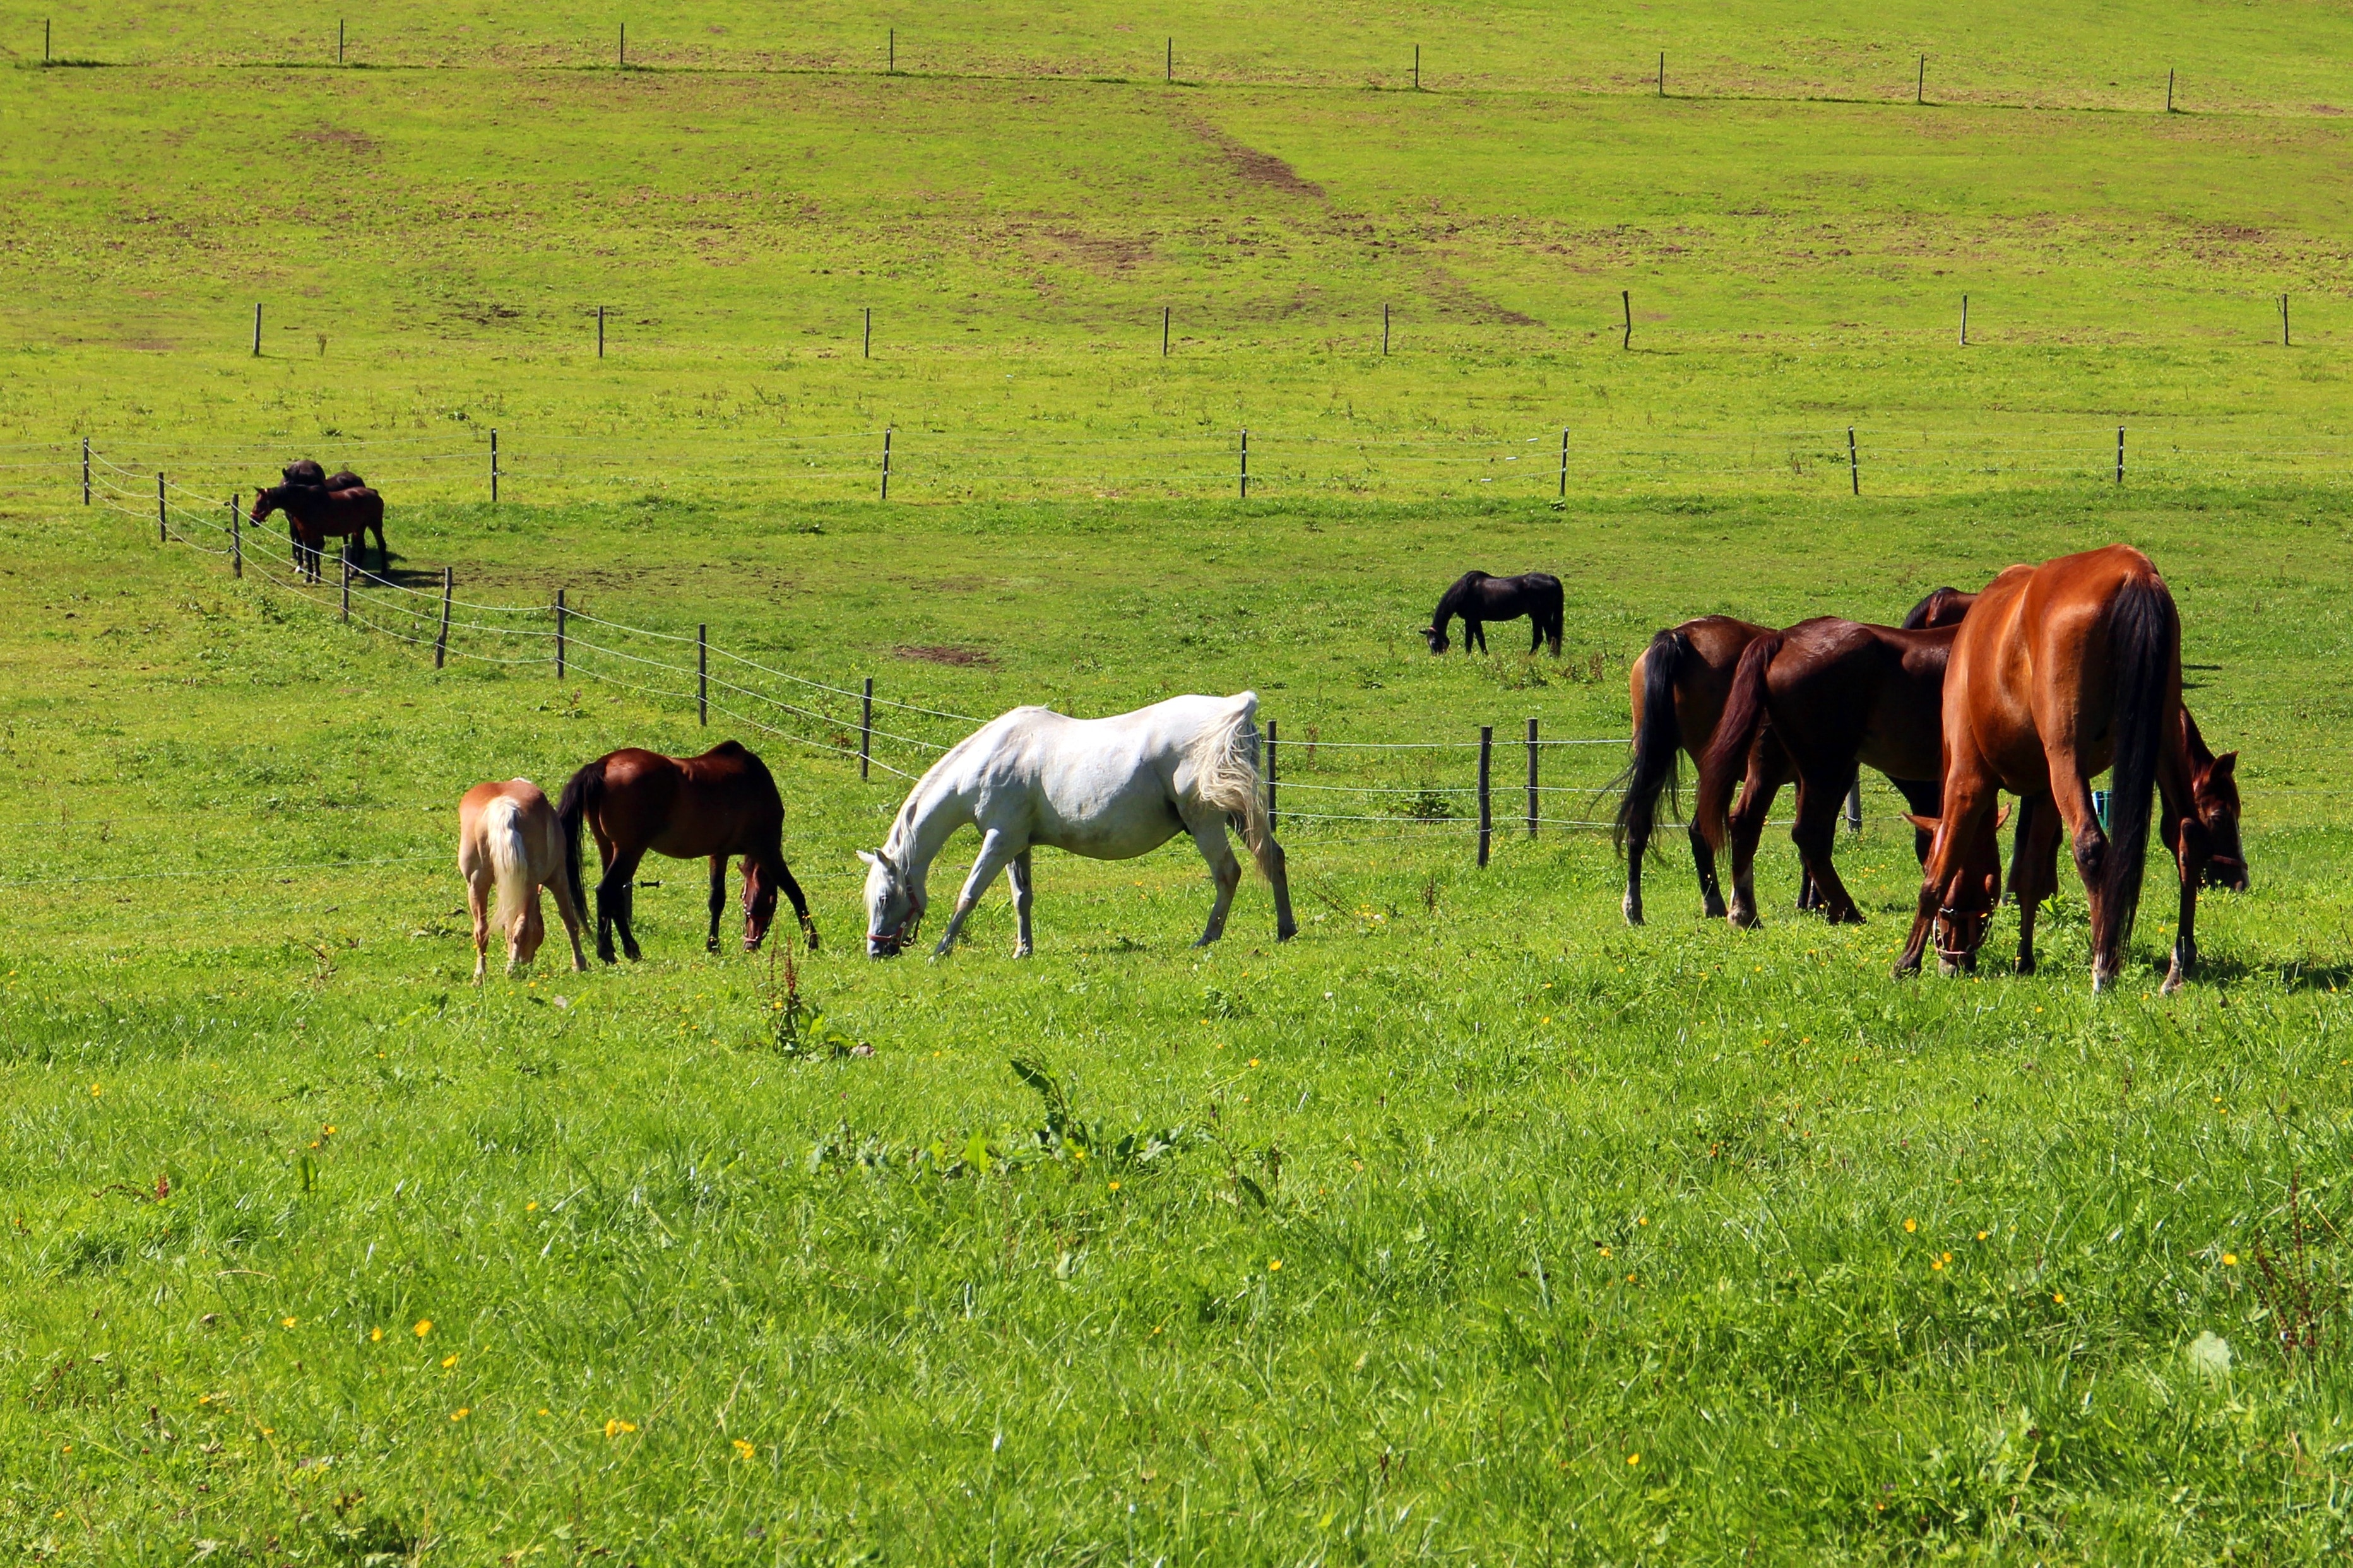 group of brown-black-white horse on green grass field during daytime